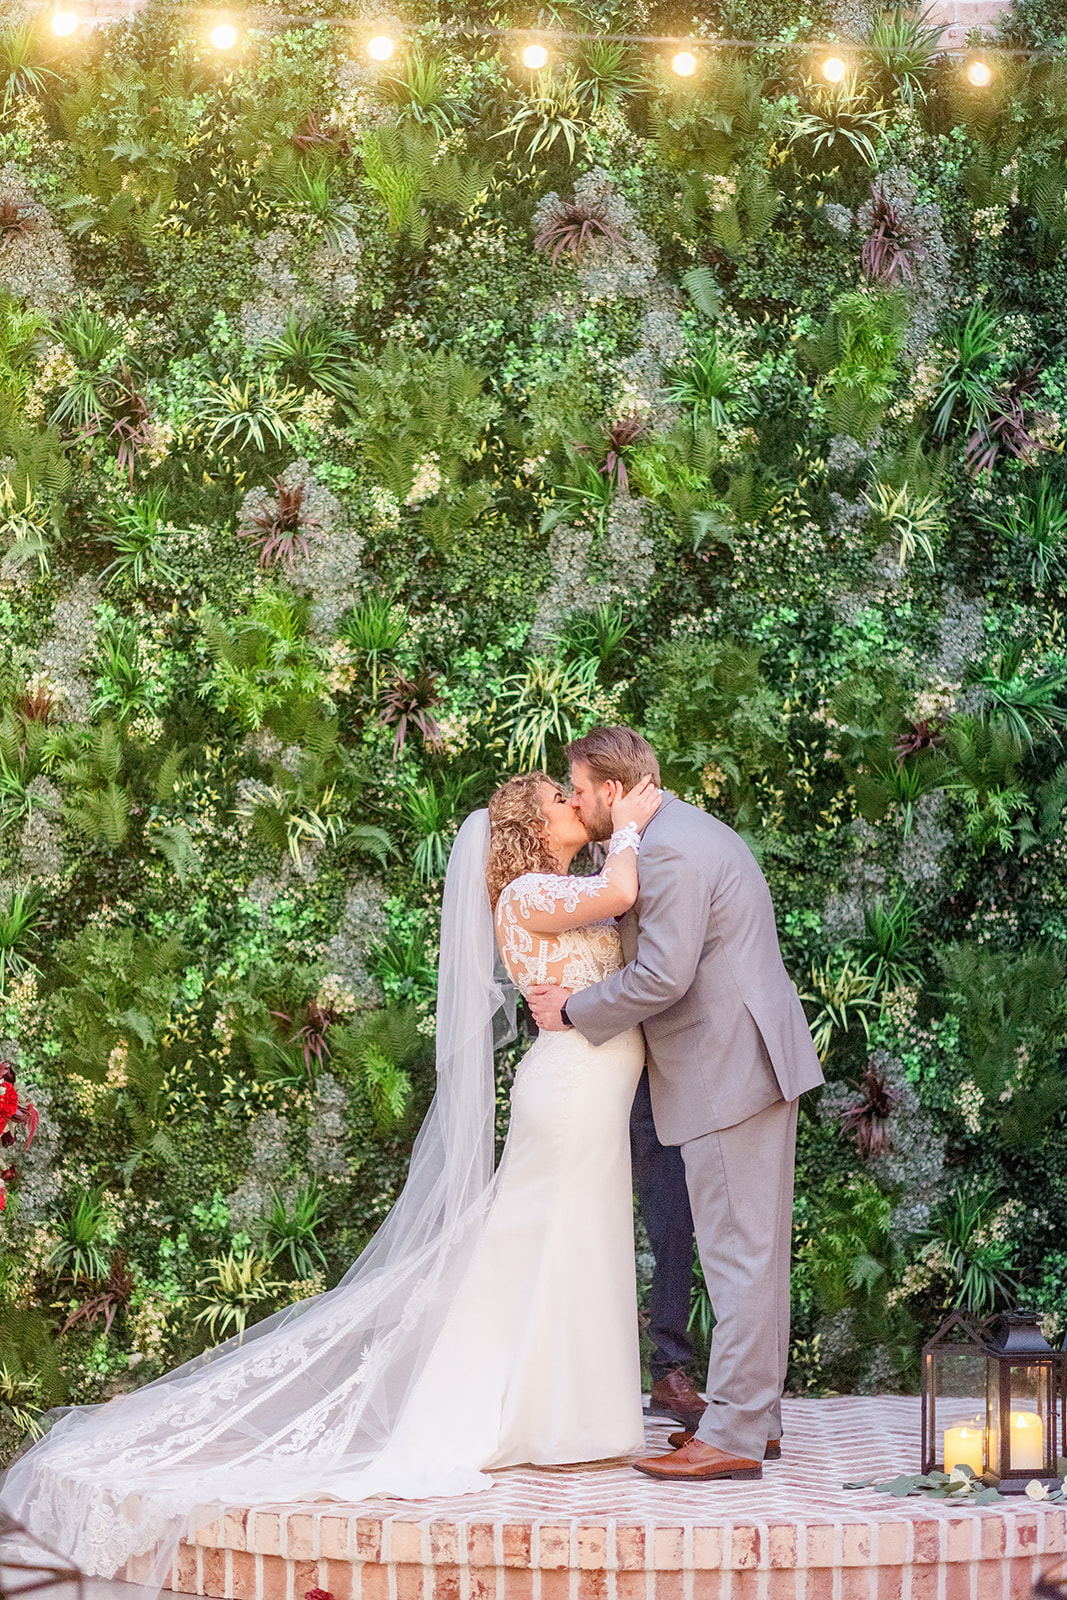 Newlyweds kiss while standing in front of a greenery wall under market lights on a brick pedestal